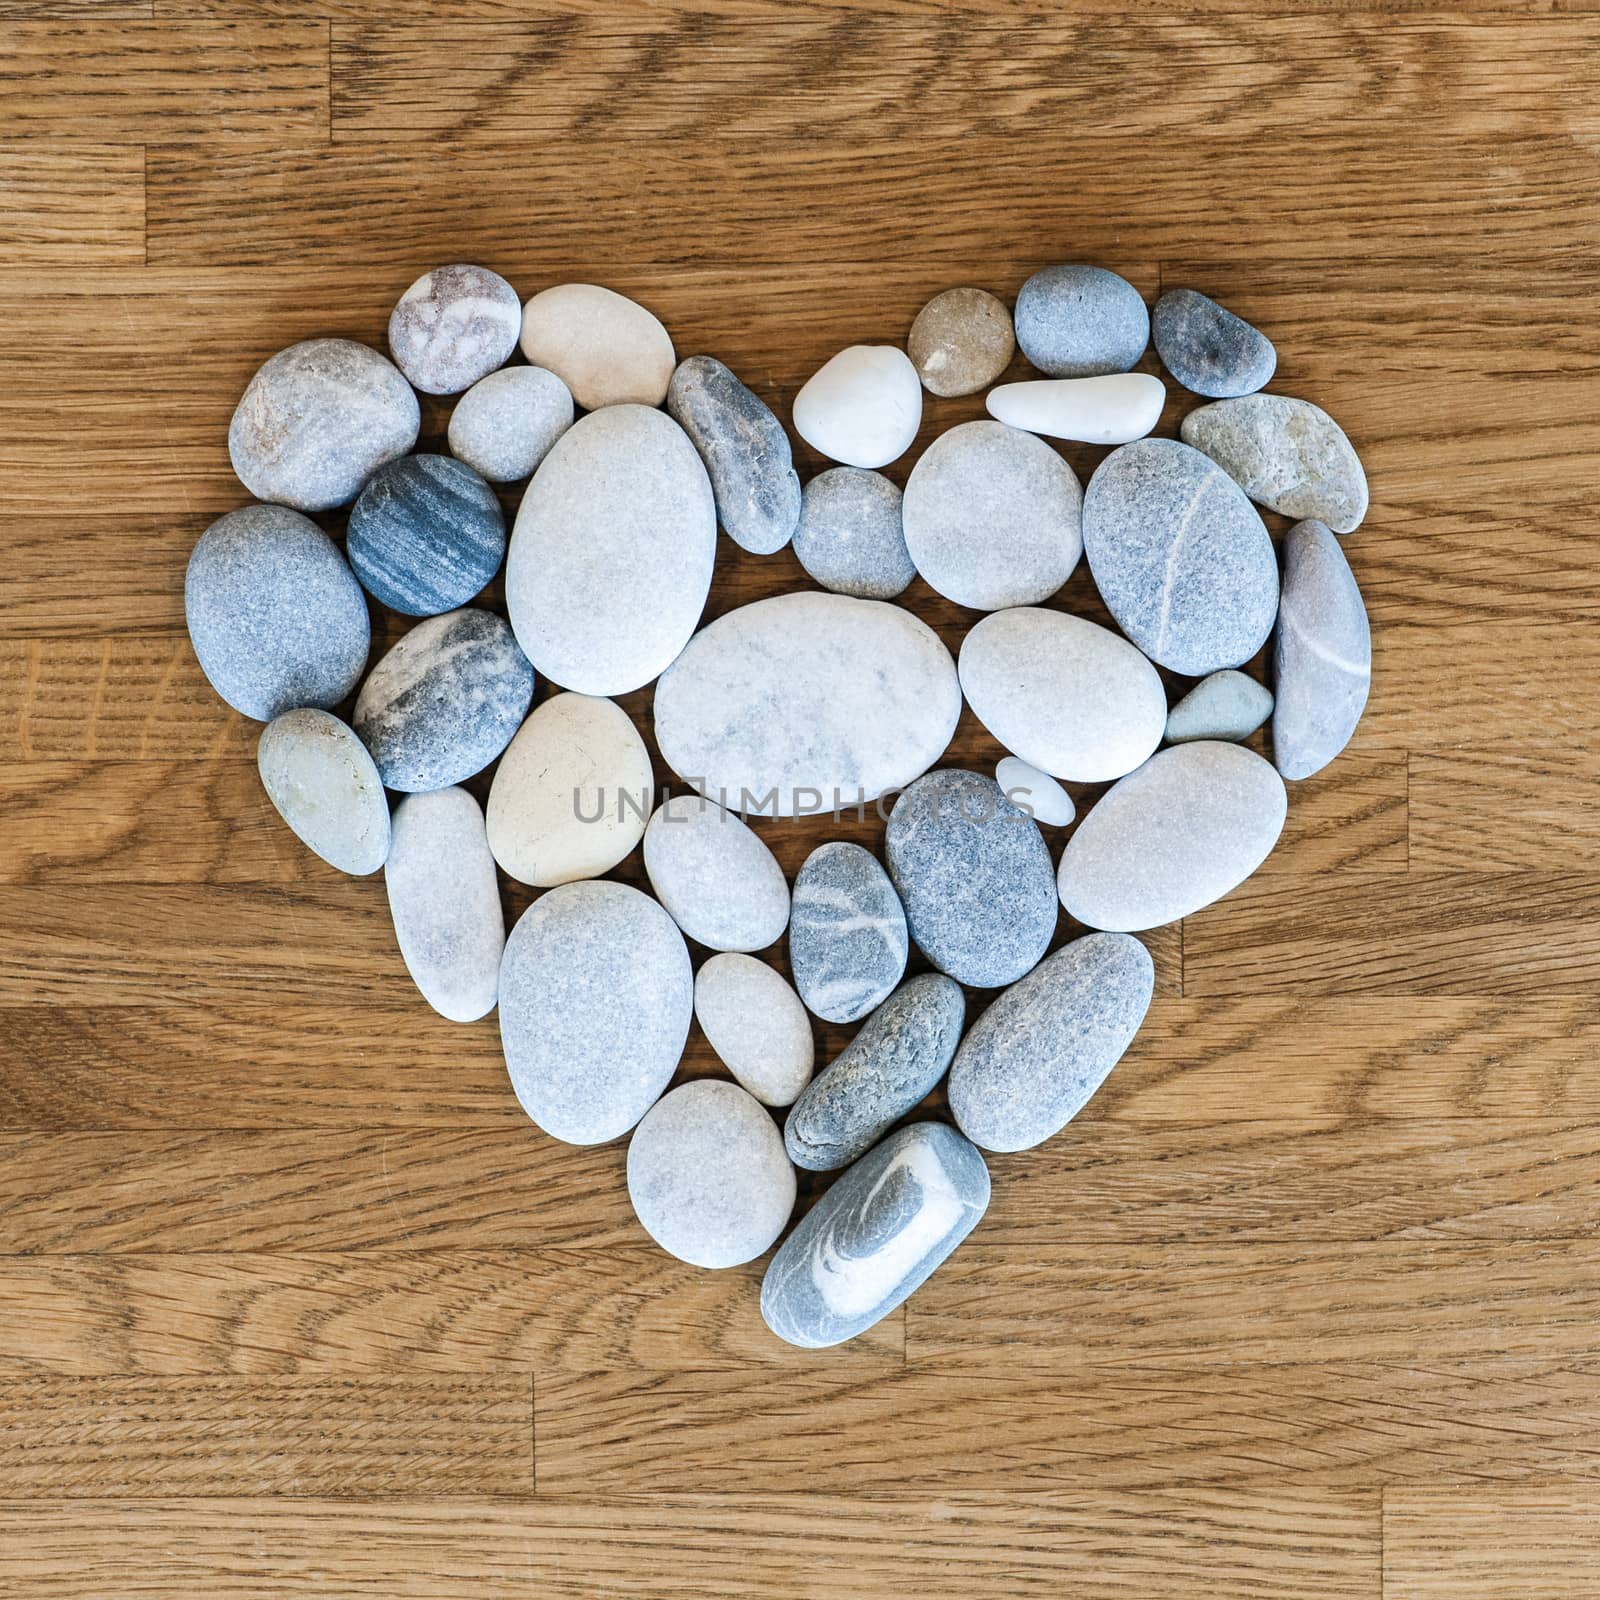 Stones arranged as a heart on a wooden background.